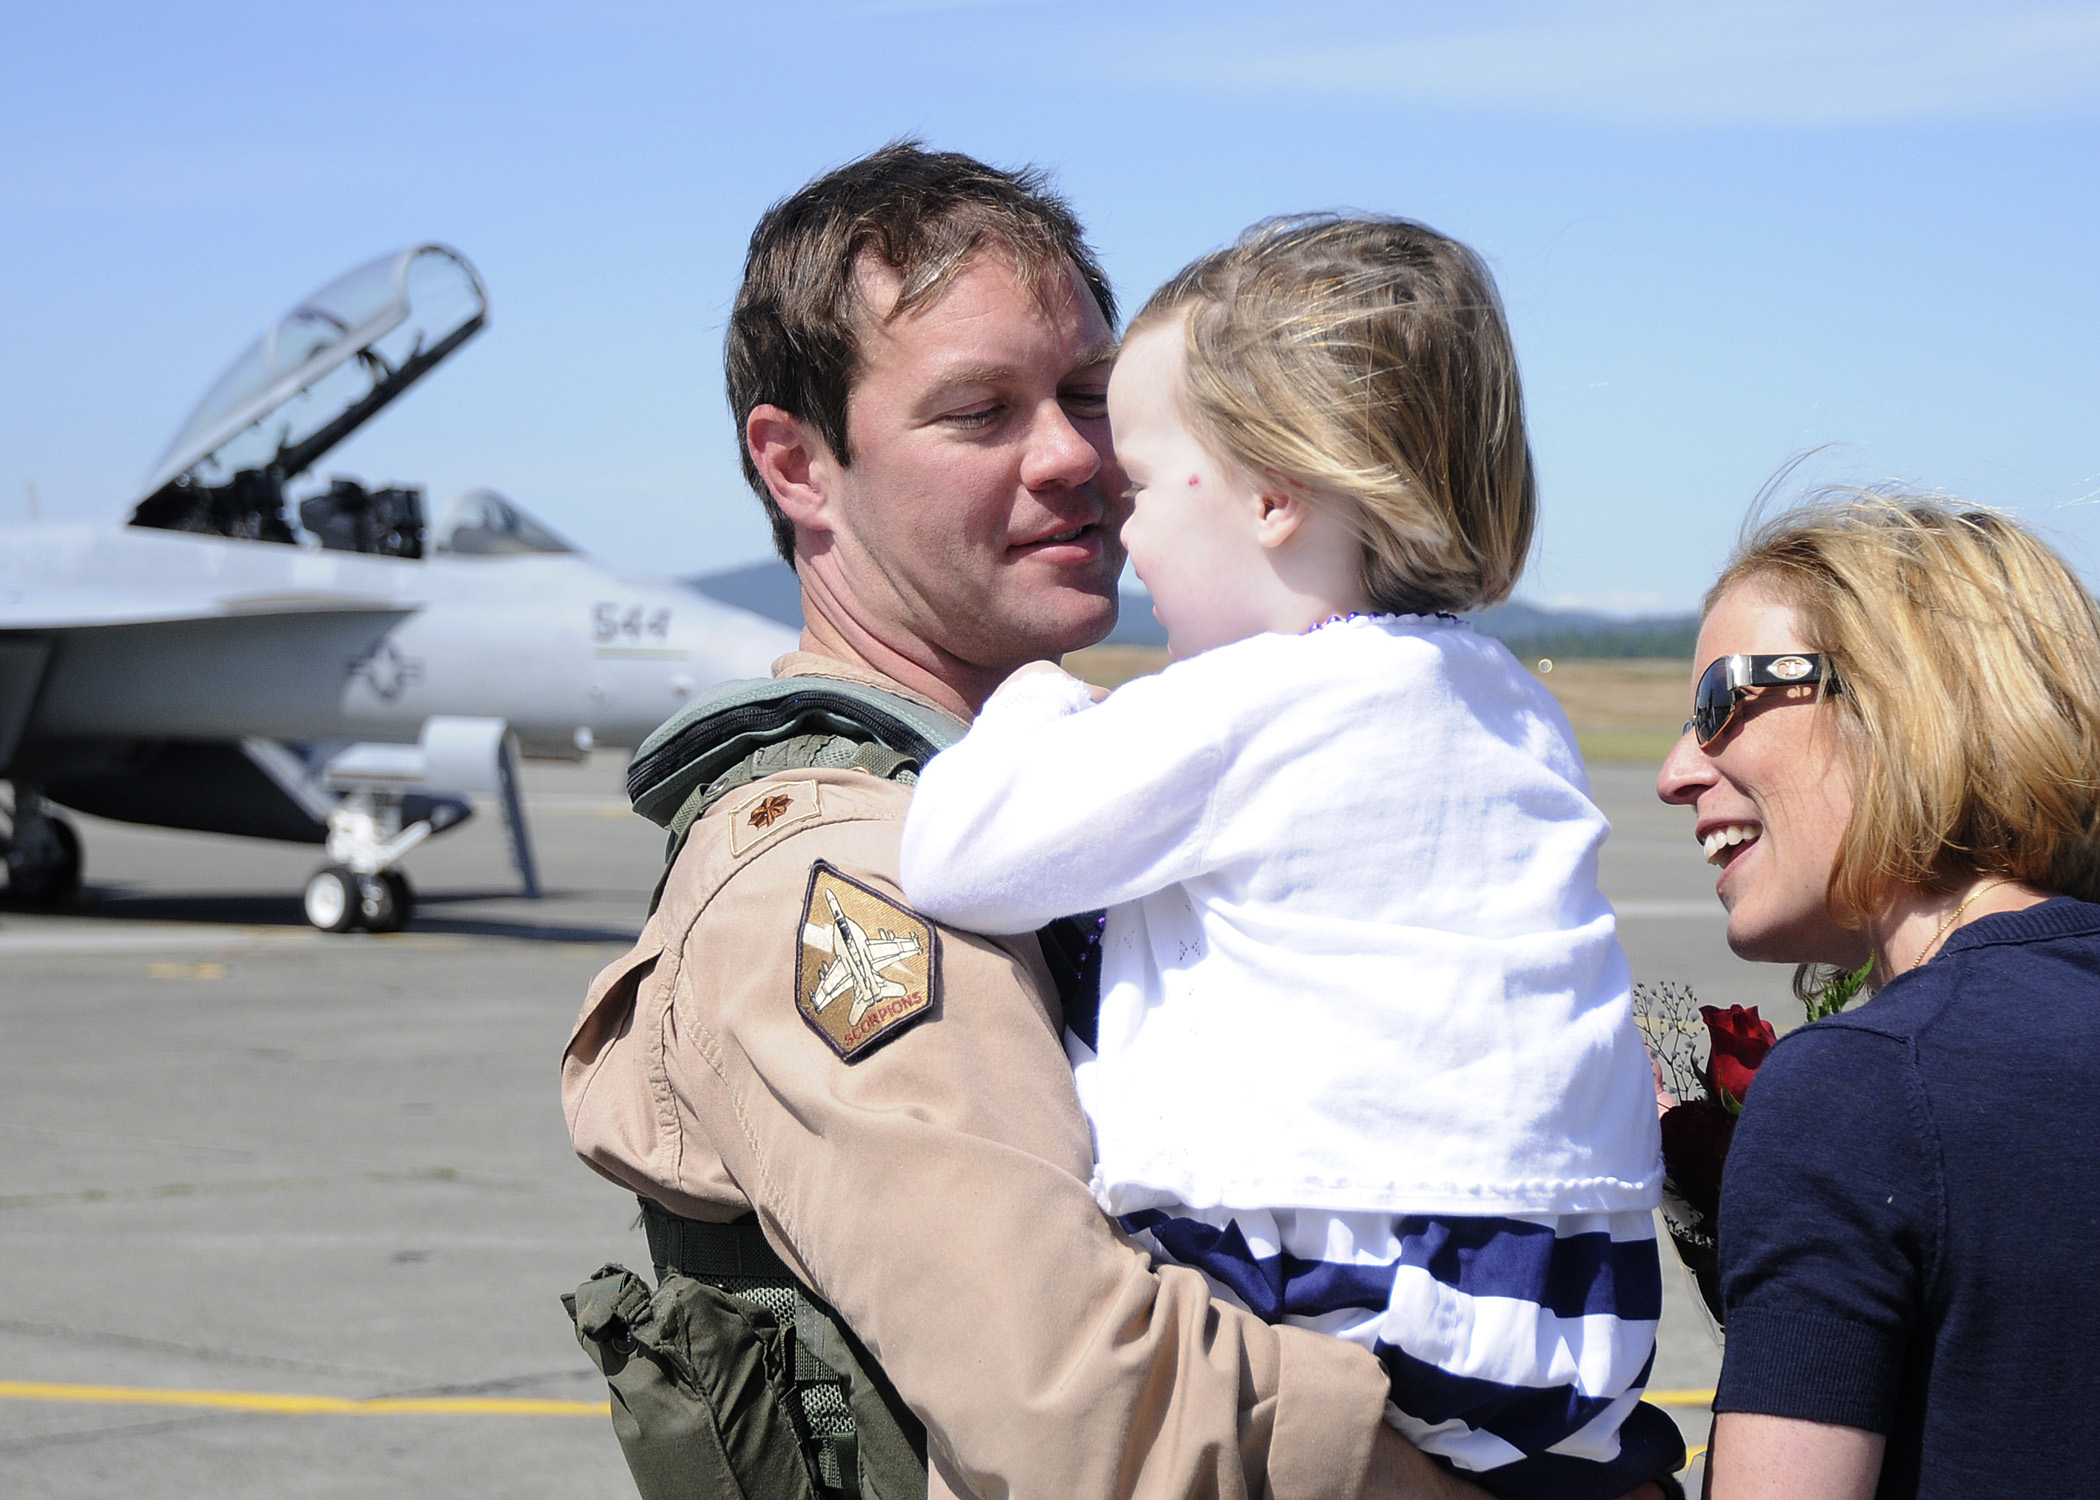 US Navy 110709-N-ZK021-011 Lt. Cmdr. Robert Scott is greeted by family during a homecoming ceremony at Naval Air Station Whidbey